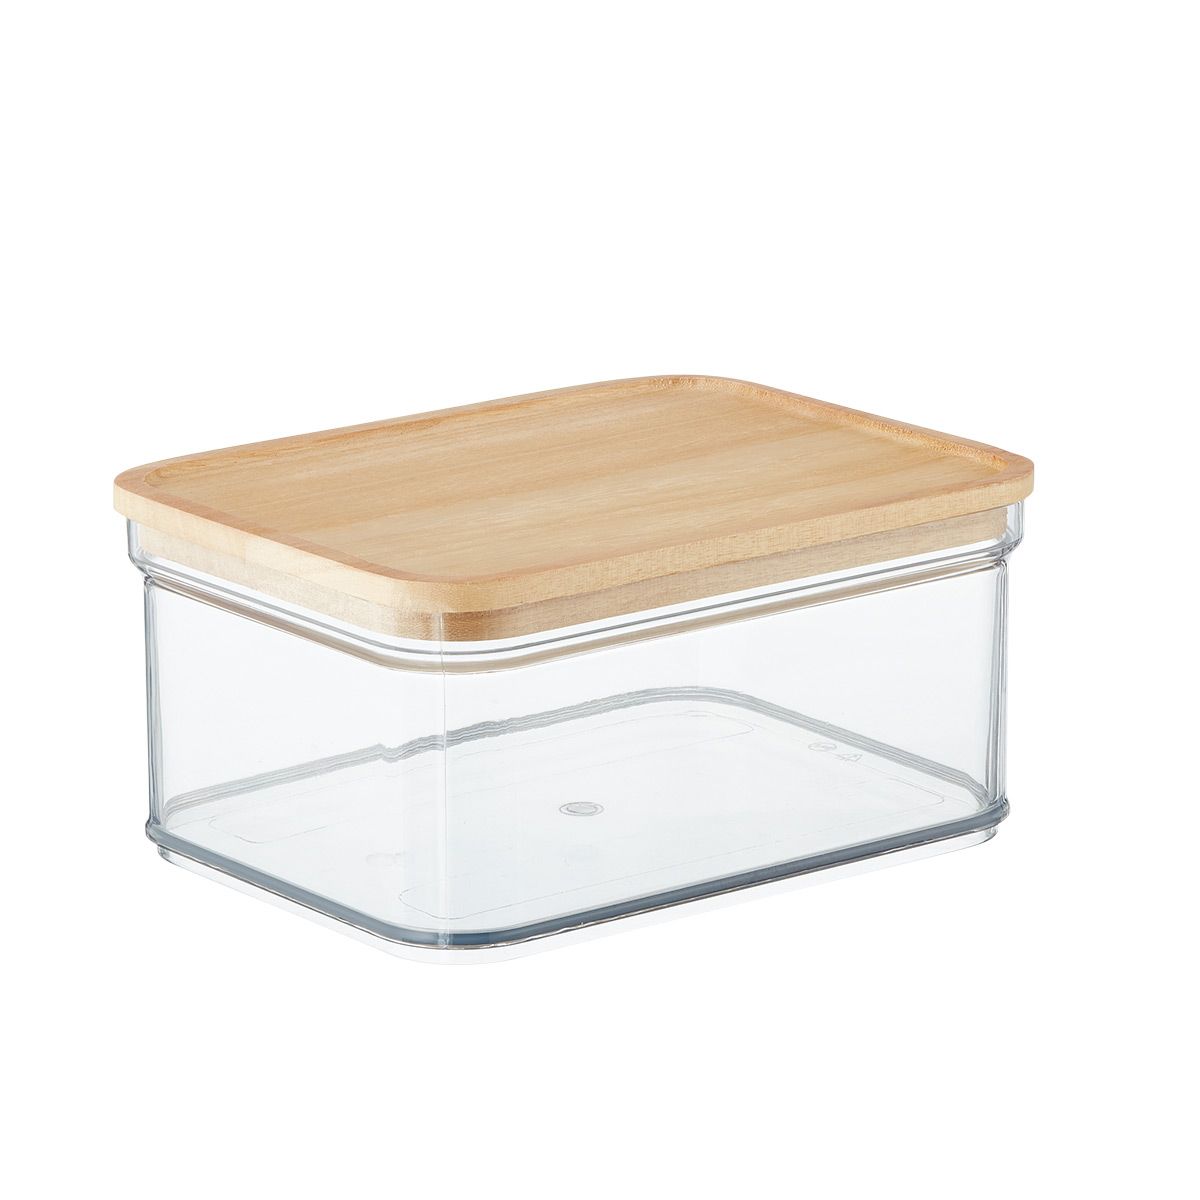 Rosanna Pansino x iD Medium Clear Organizer w/ Wood Lid Clear | The Container Store